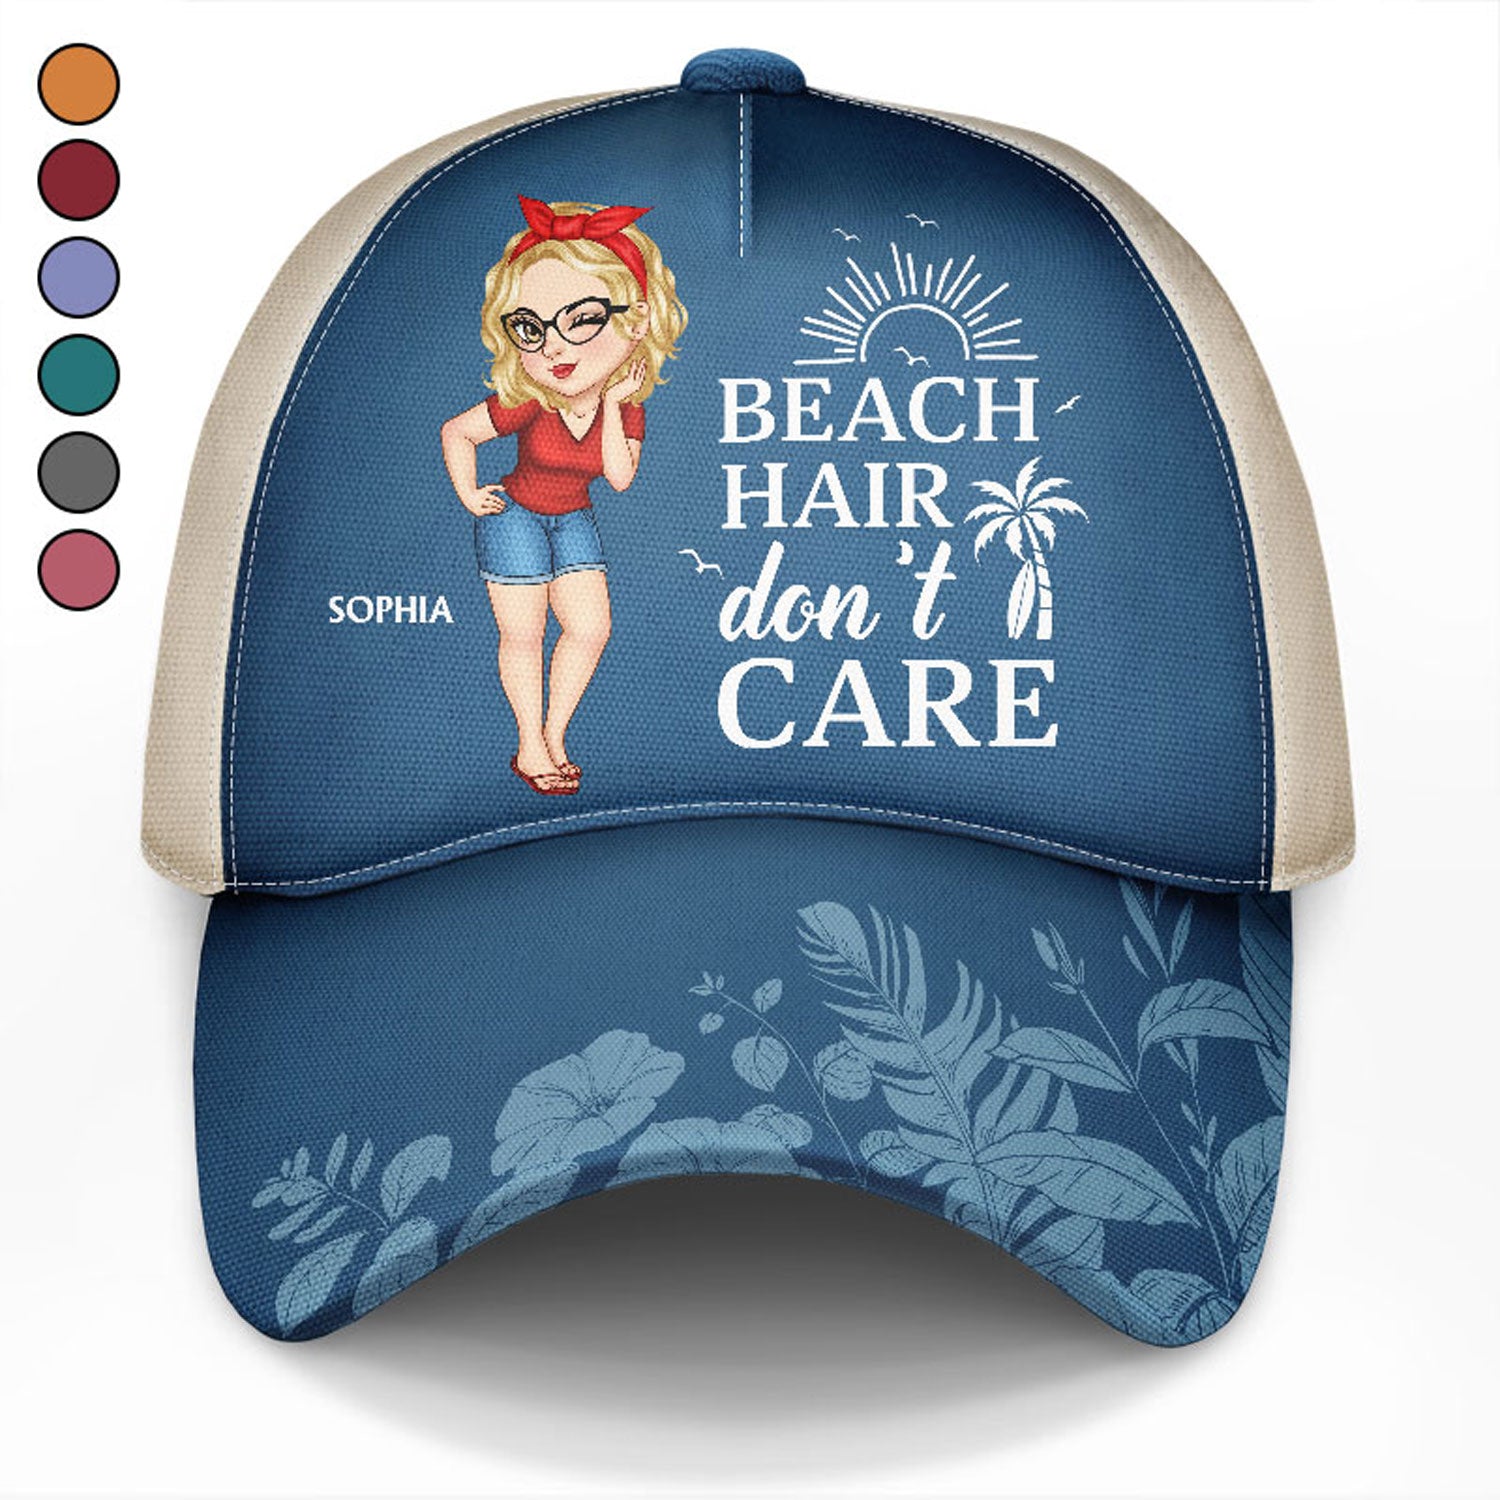 Beach Hair Don't Care - Gift For Beach Lovers, Traveling Lovers, Women - Personalized Classic Cap